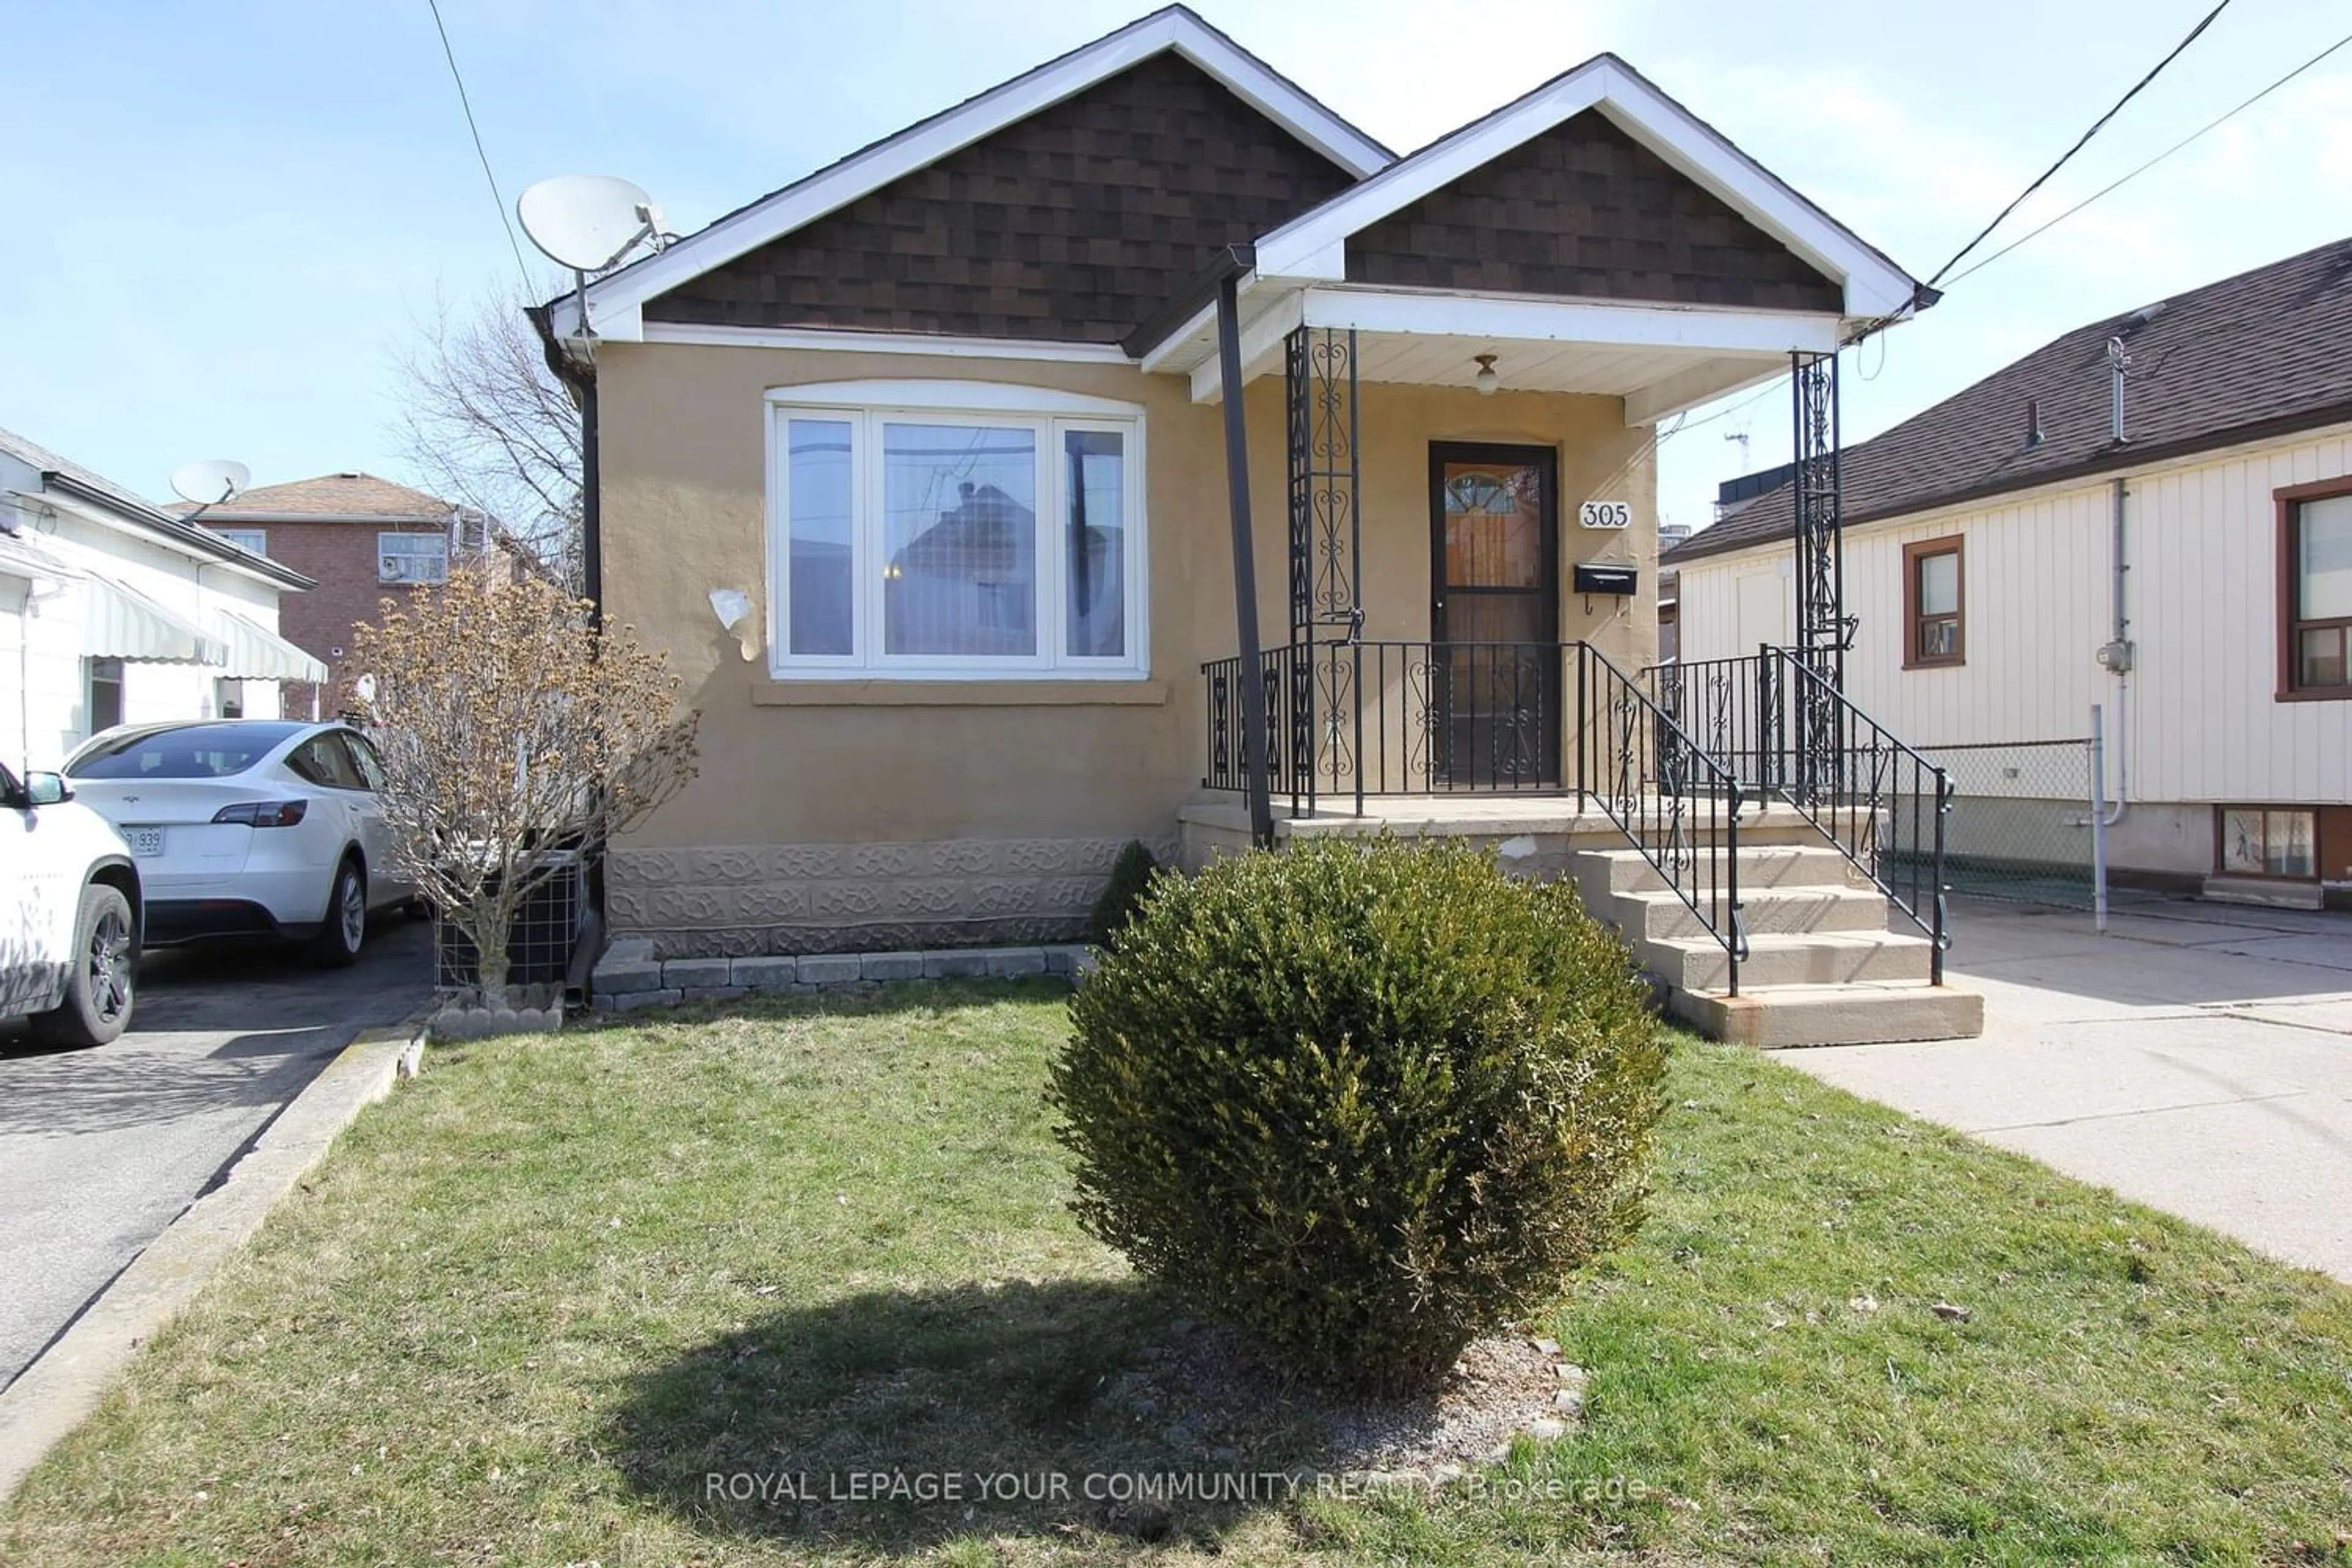 Home with unknown exterior material for 305 Westlake Ave, Toronto Ontario M4C 4T8